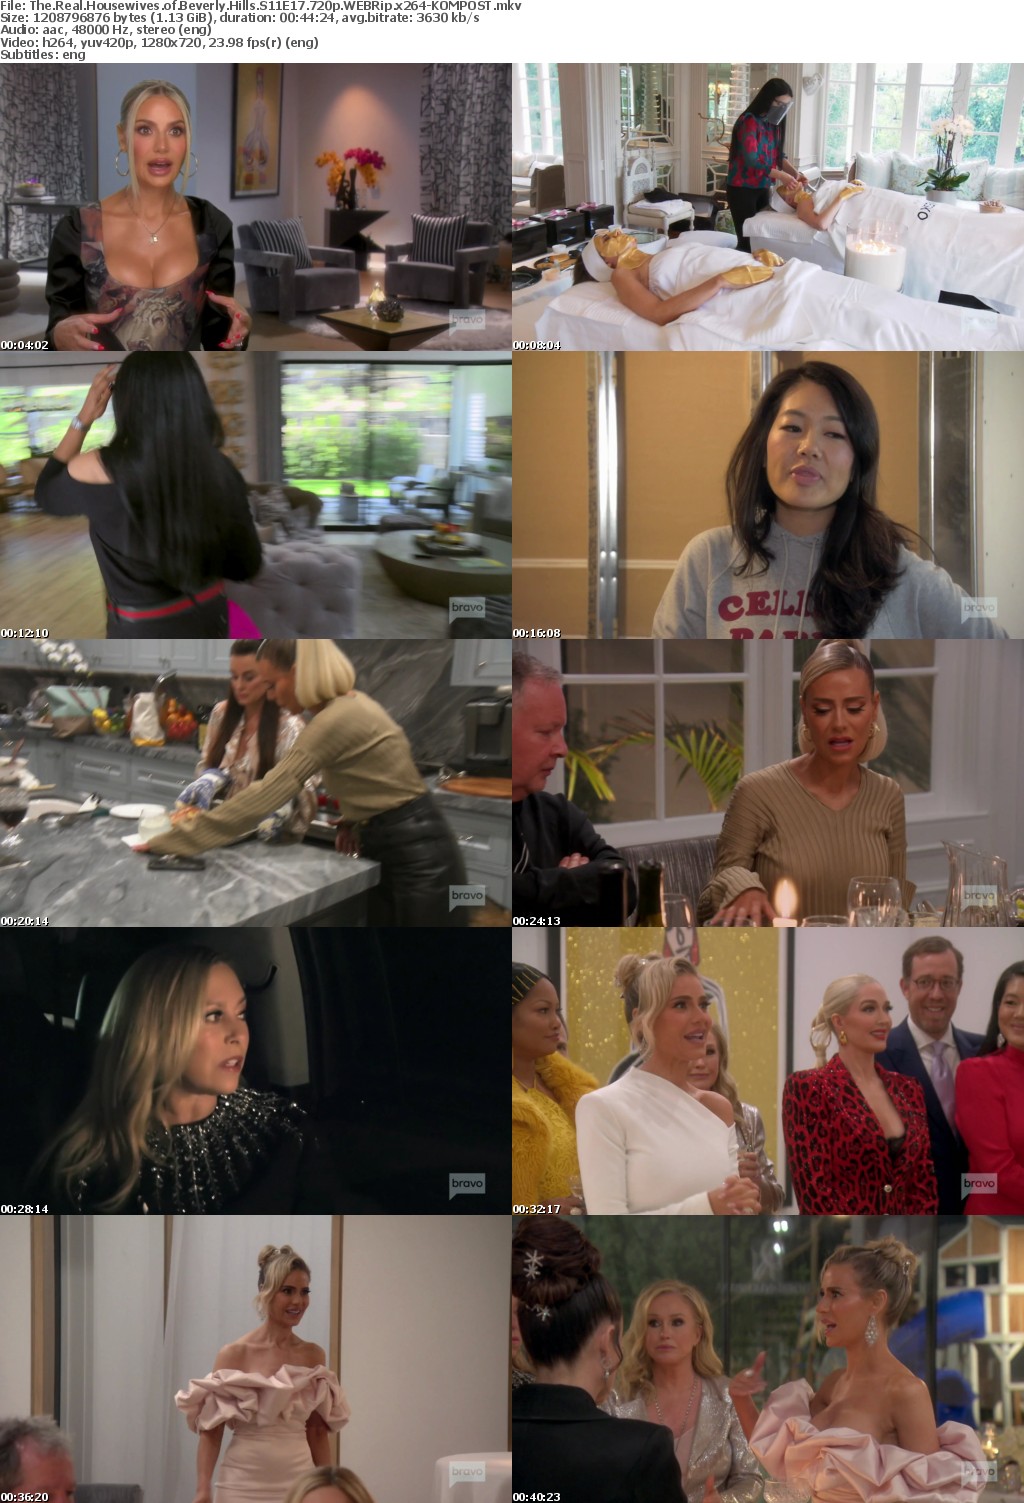 The Real Housewives of Beverly Hills S11E17 720p WEBRip x264-KOMPOST